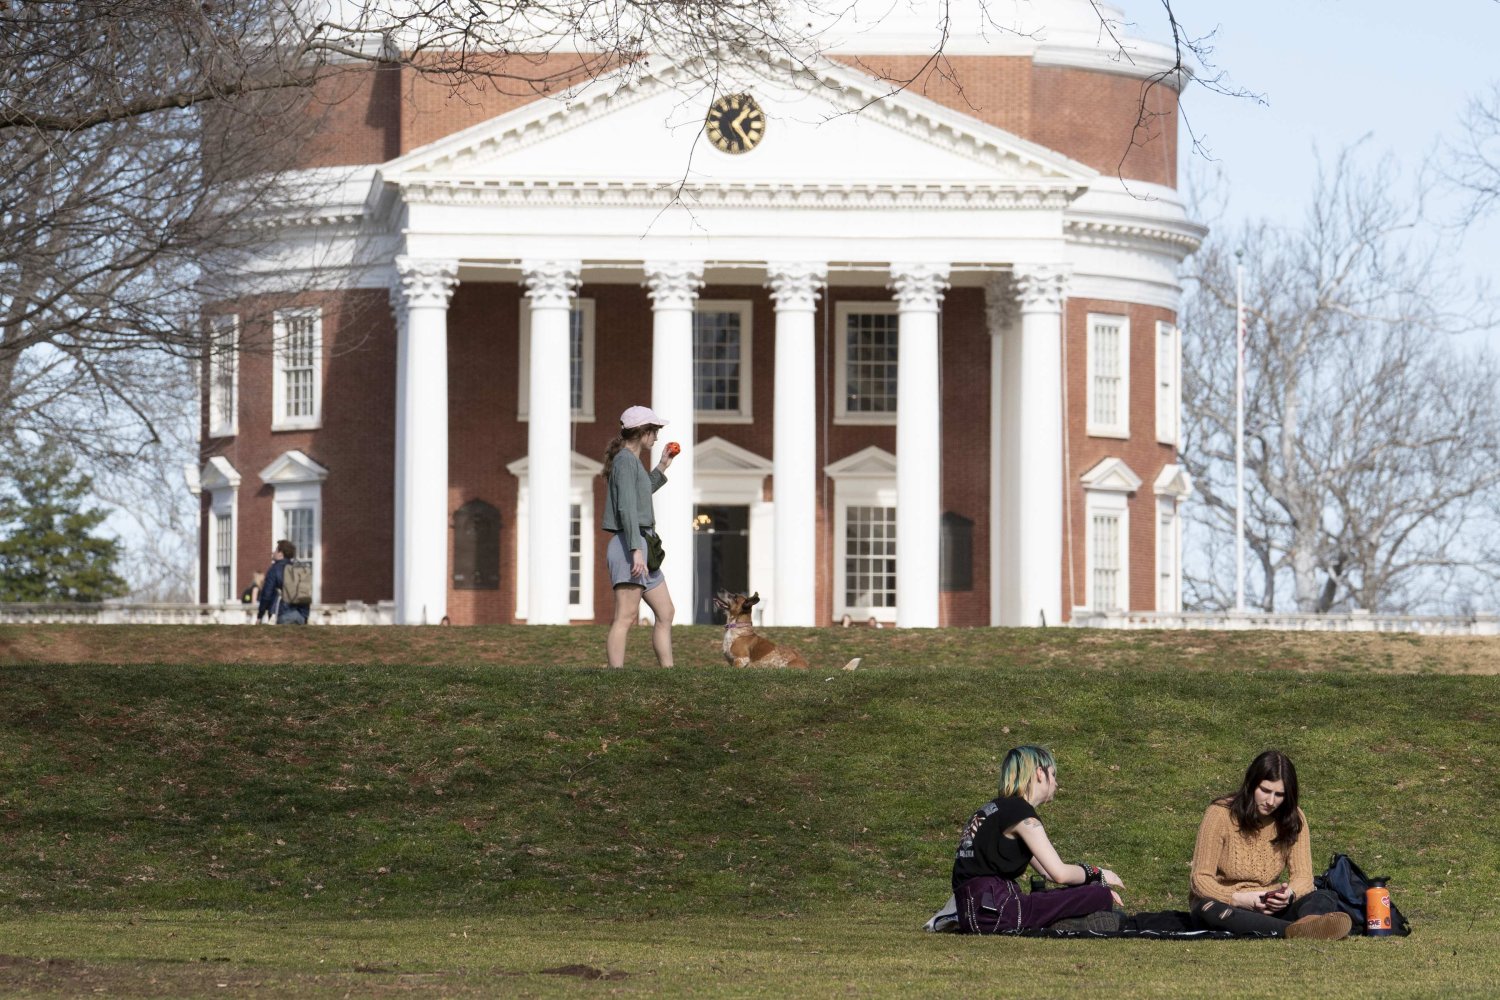 Students sit on the lawn in front of the UVA rotunda